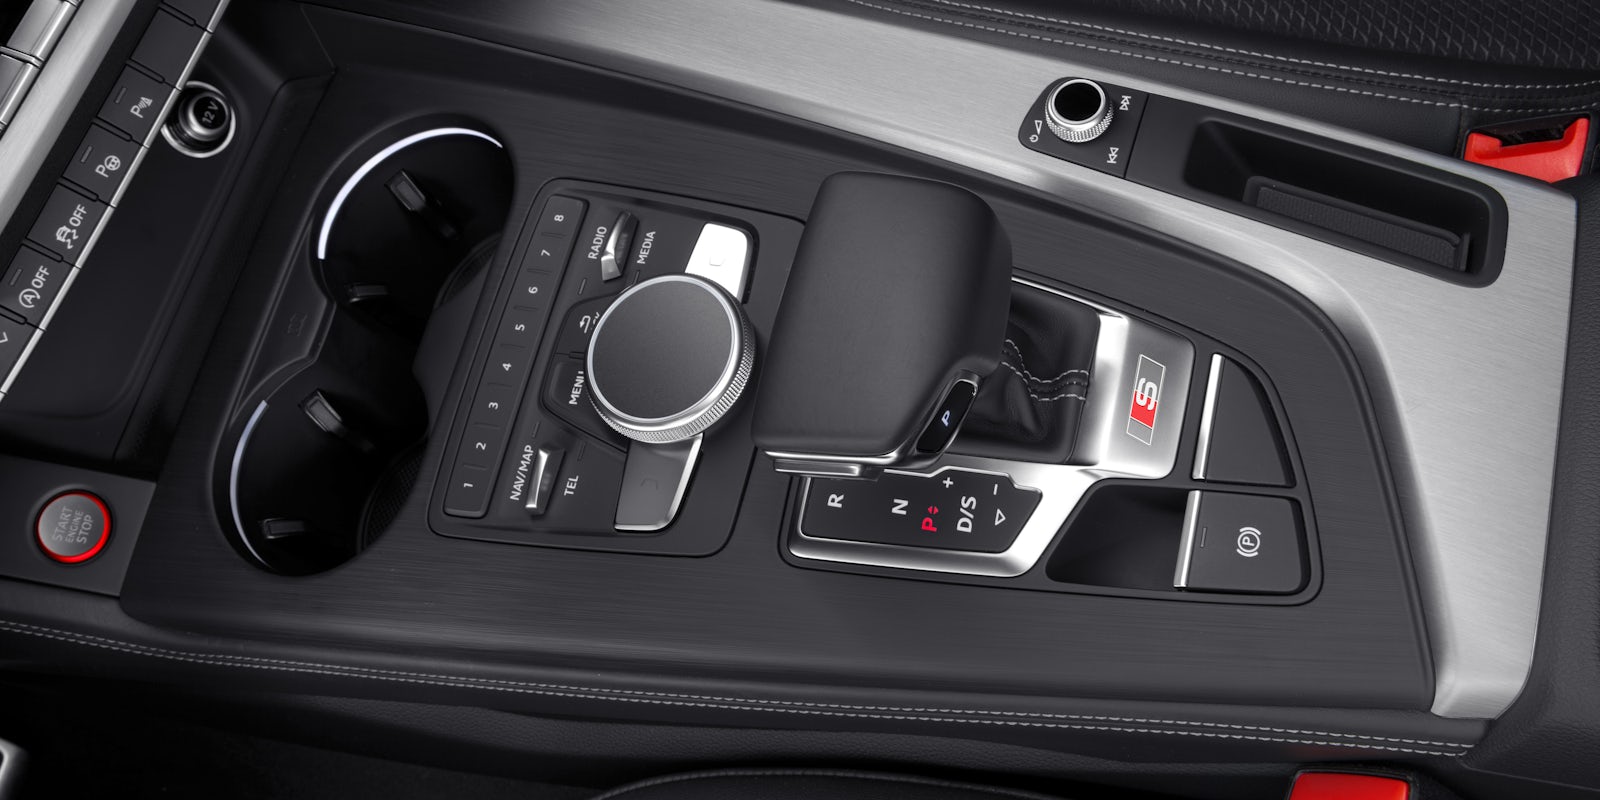 The flat-bottomed steering wheel sets the S4 apart from a regular A4